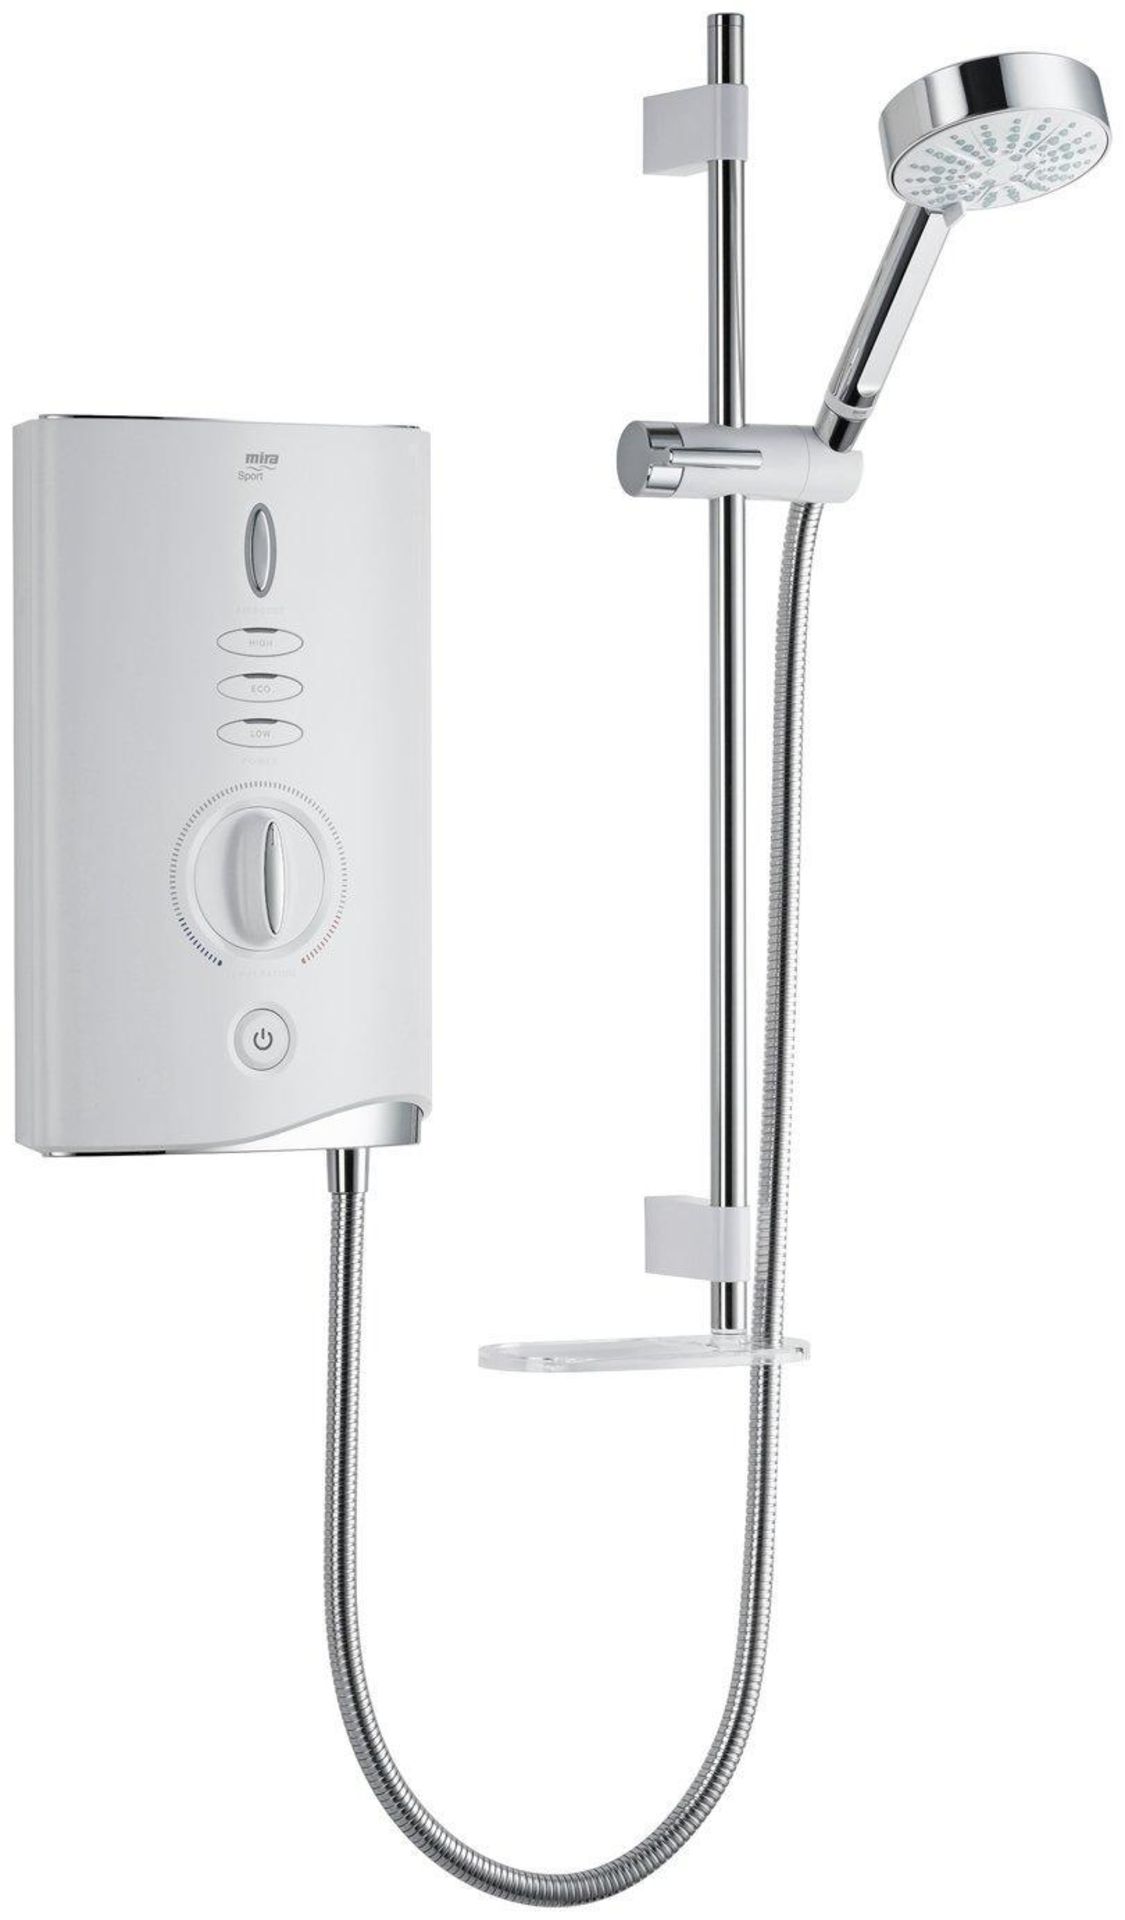 Mira Showers Sport Max 9.0kw Electric Shower 1.1746.007 - SR4R. The UK's best performing electric